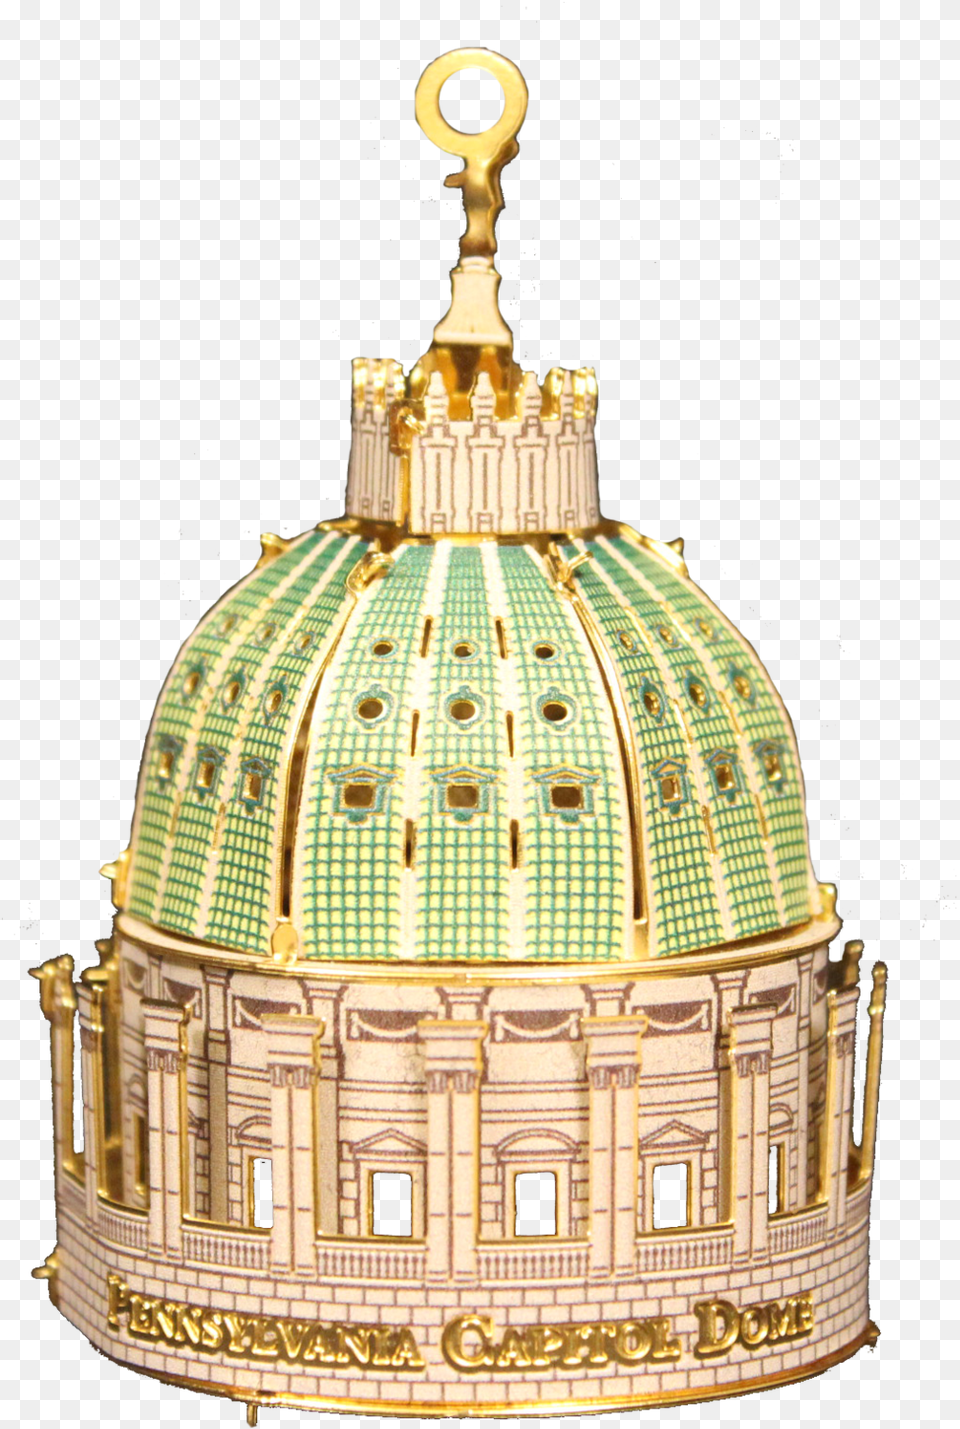 New Dome 2018, Architecture, Building, Accessories, Lamp Png